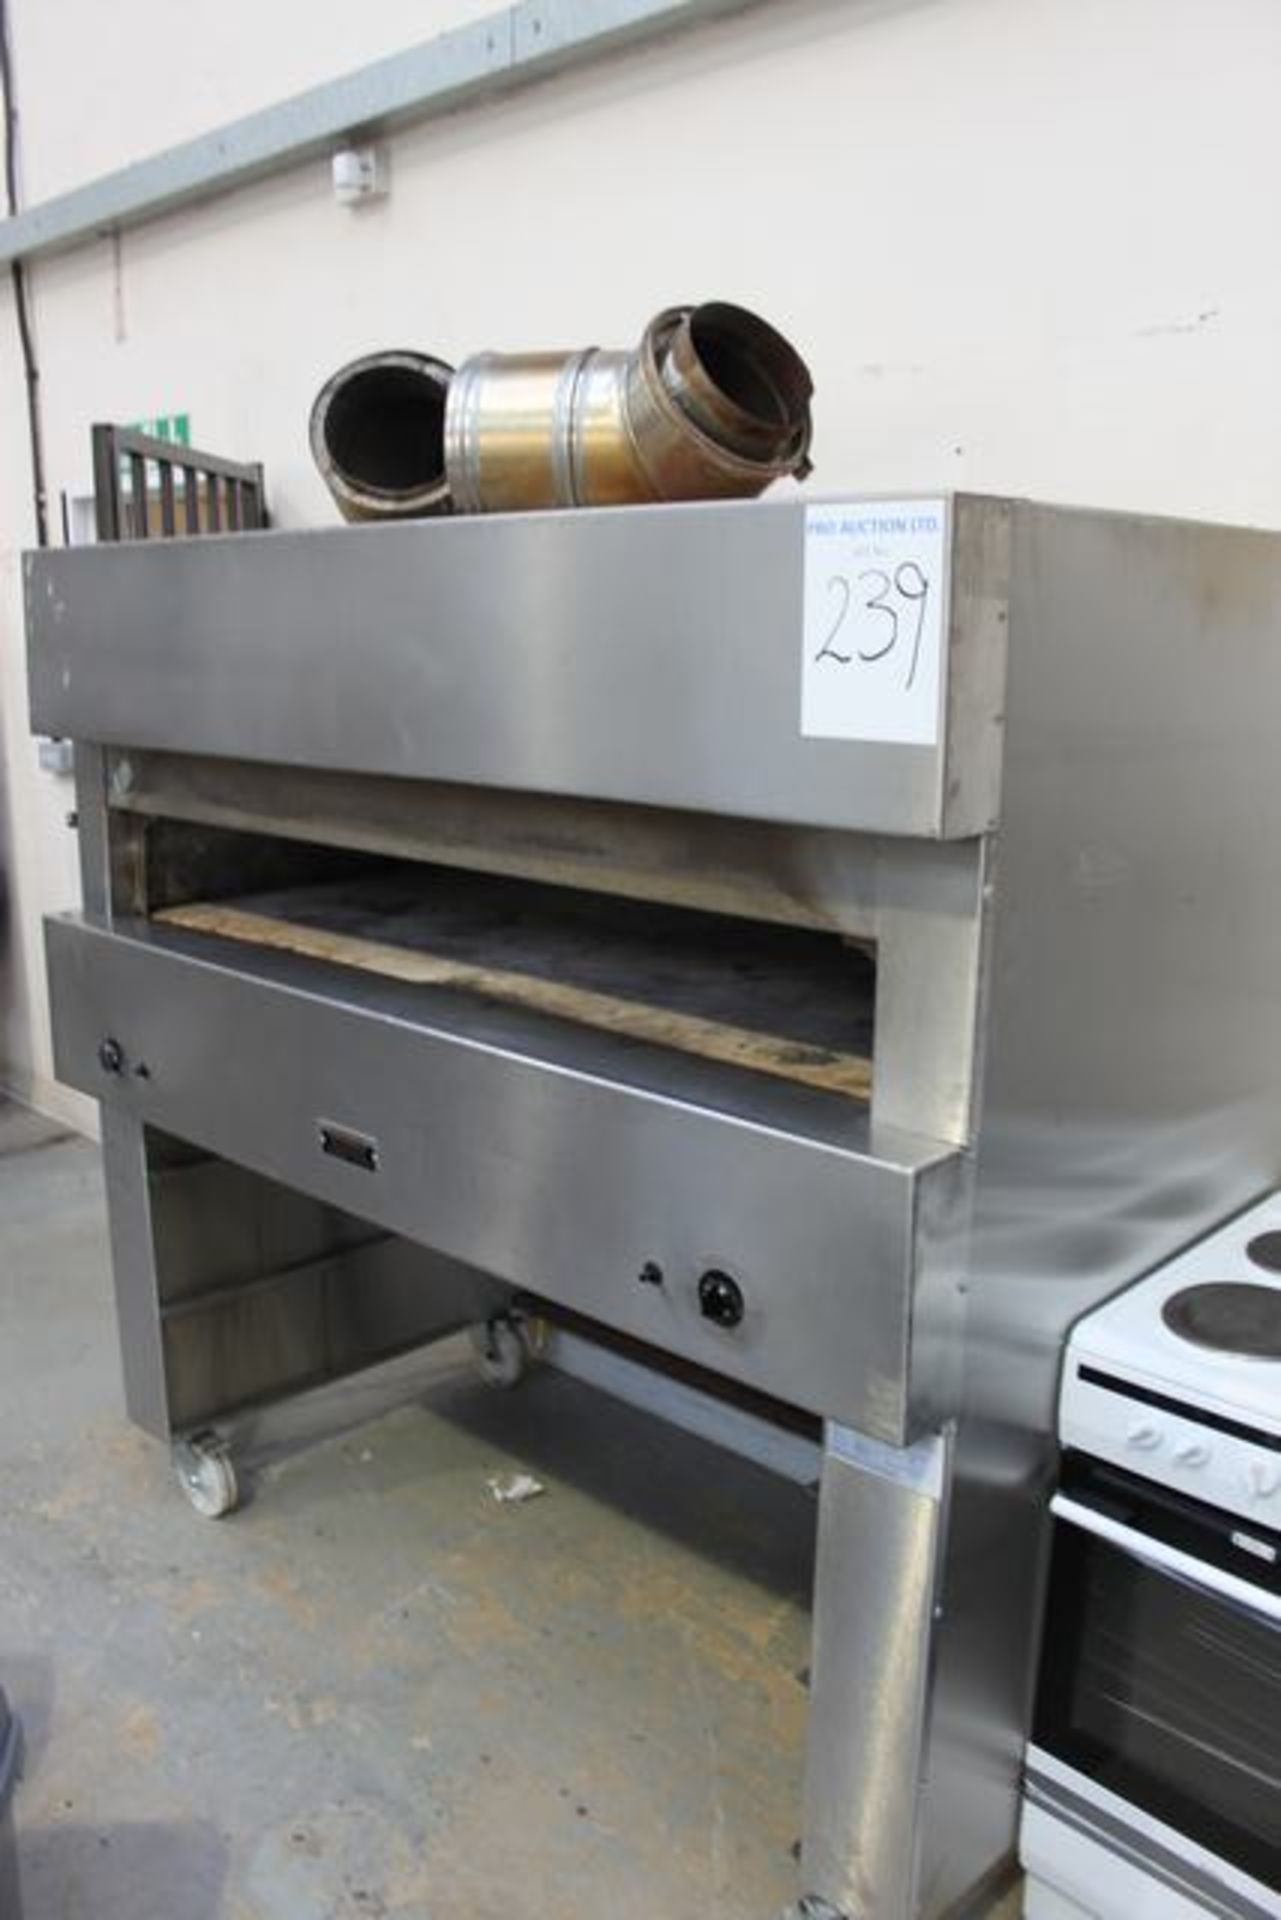 Clayburn 86-AS-488 gas pizza oven 1600mm x 200mm x 700mm deep temperature high Setting 26.5kw / 86, - Image 2 of 5